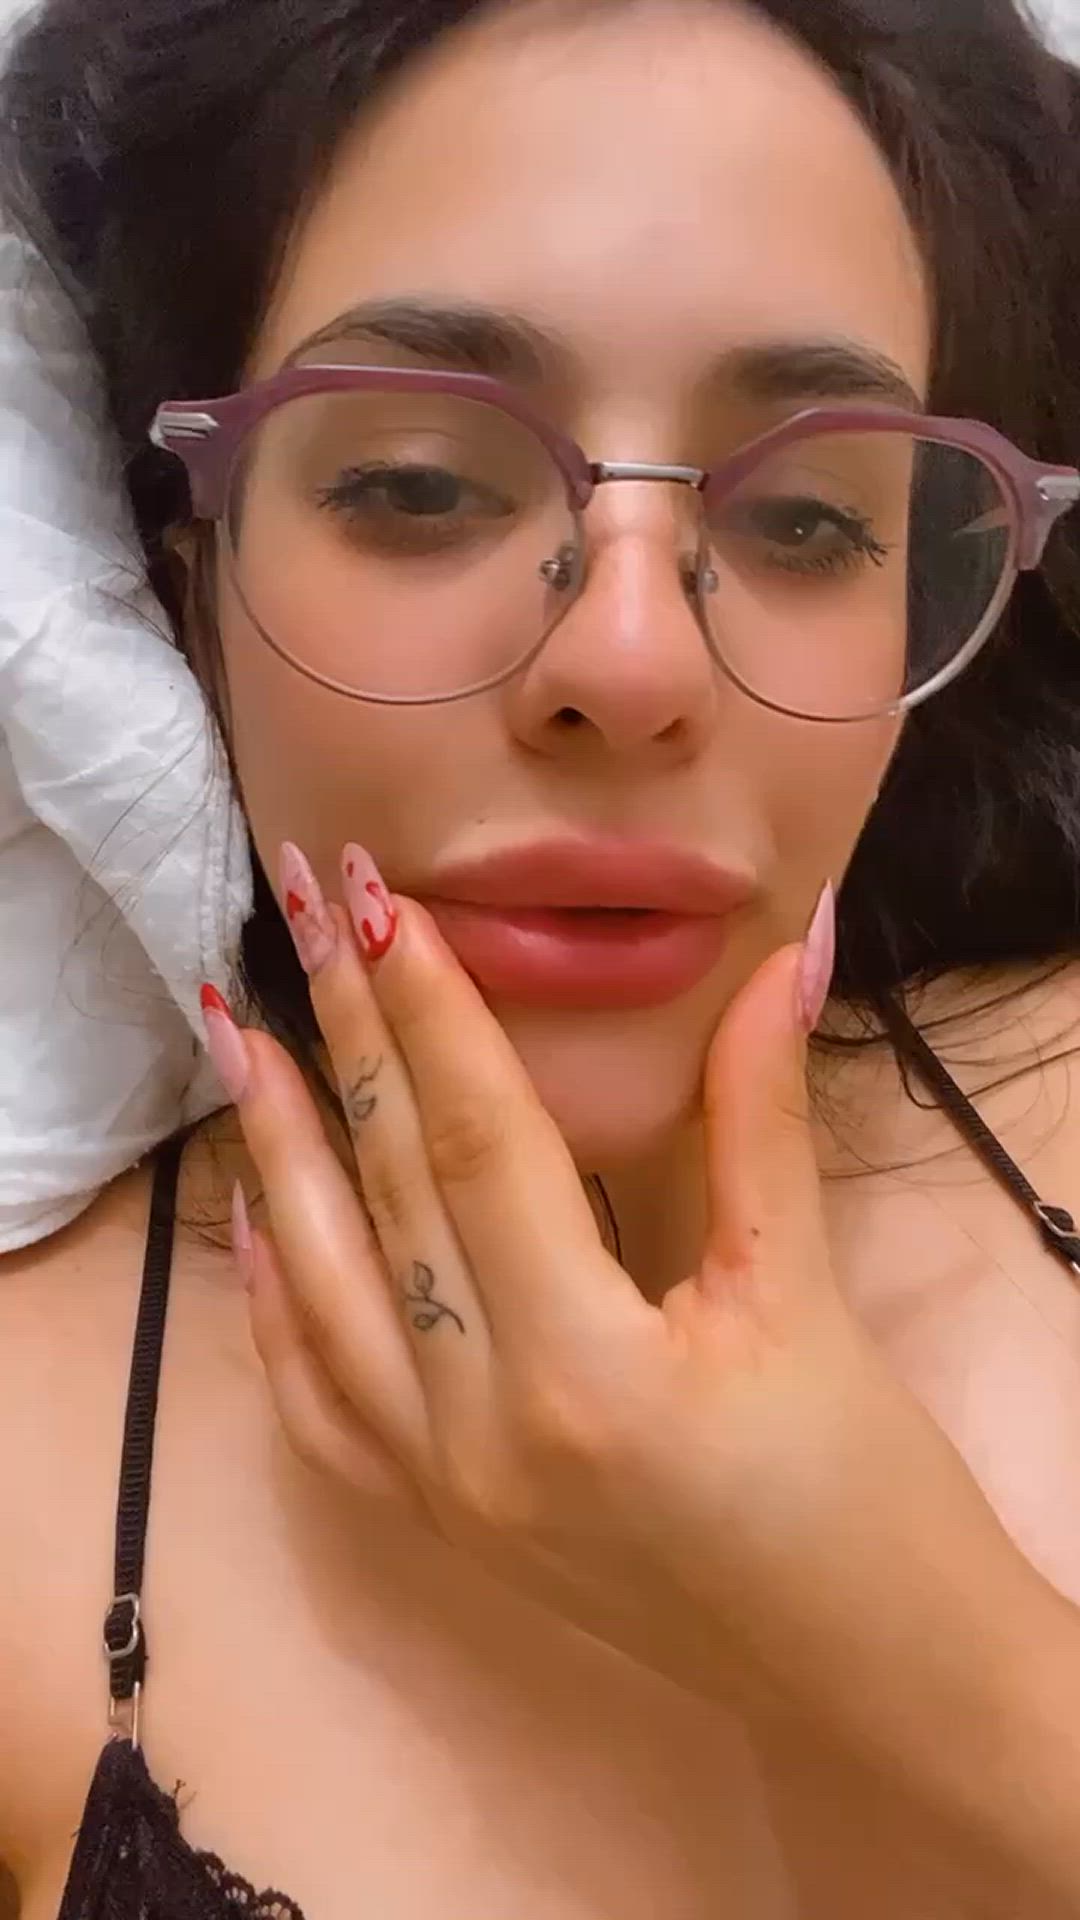 Pussy porn video with onlyfans model luliluux <strong>@luliluux</strong>